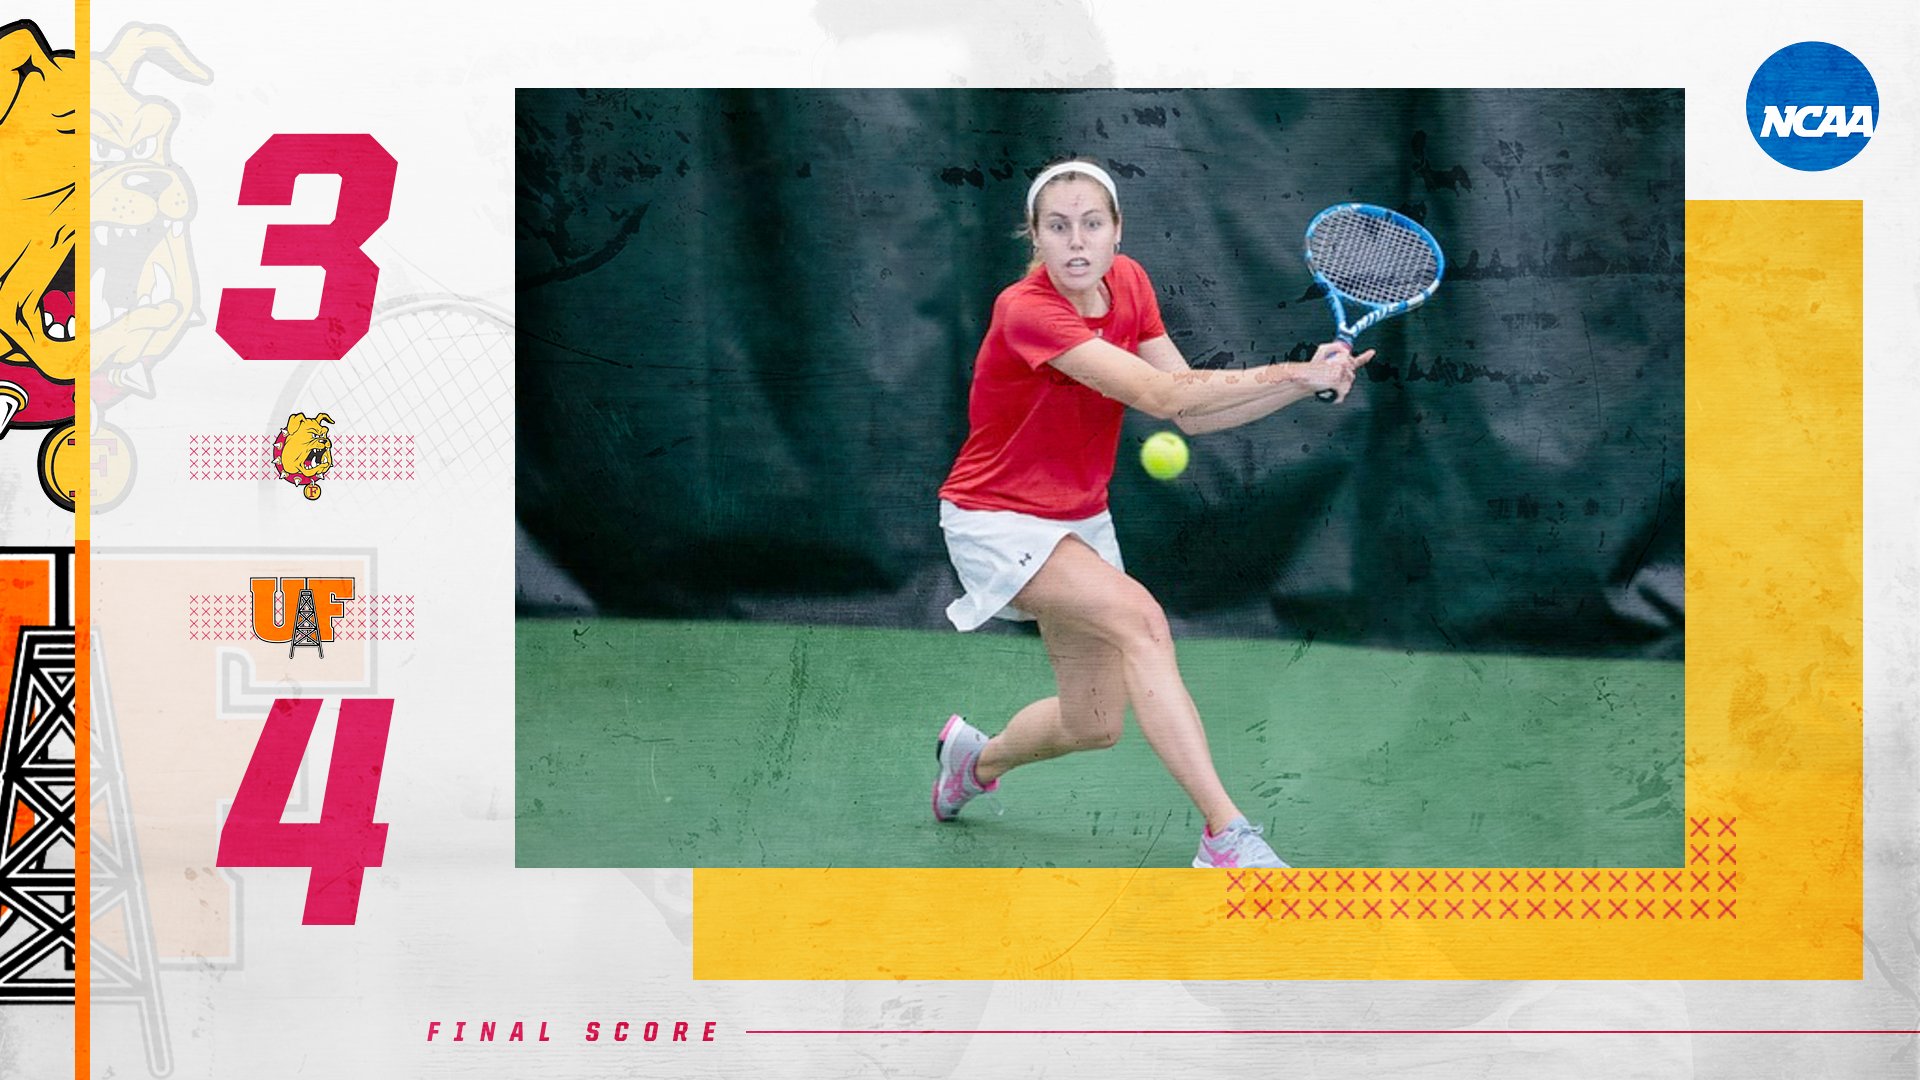 Ferris State Drops Tight Decision At Findlay In Regional Women's Tennis Competition